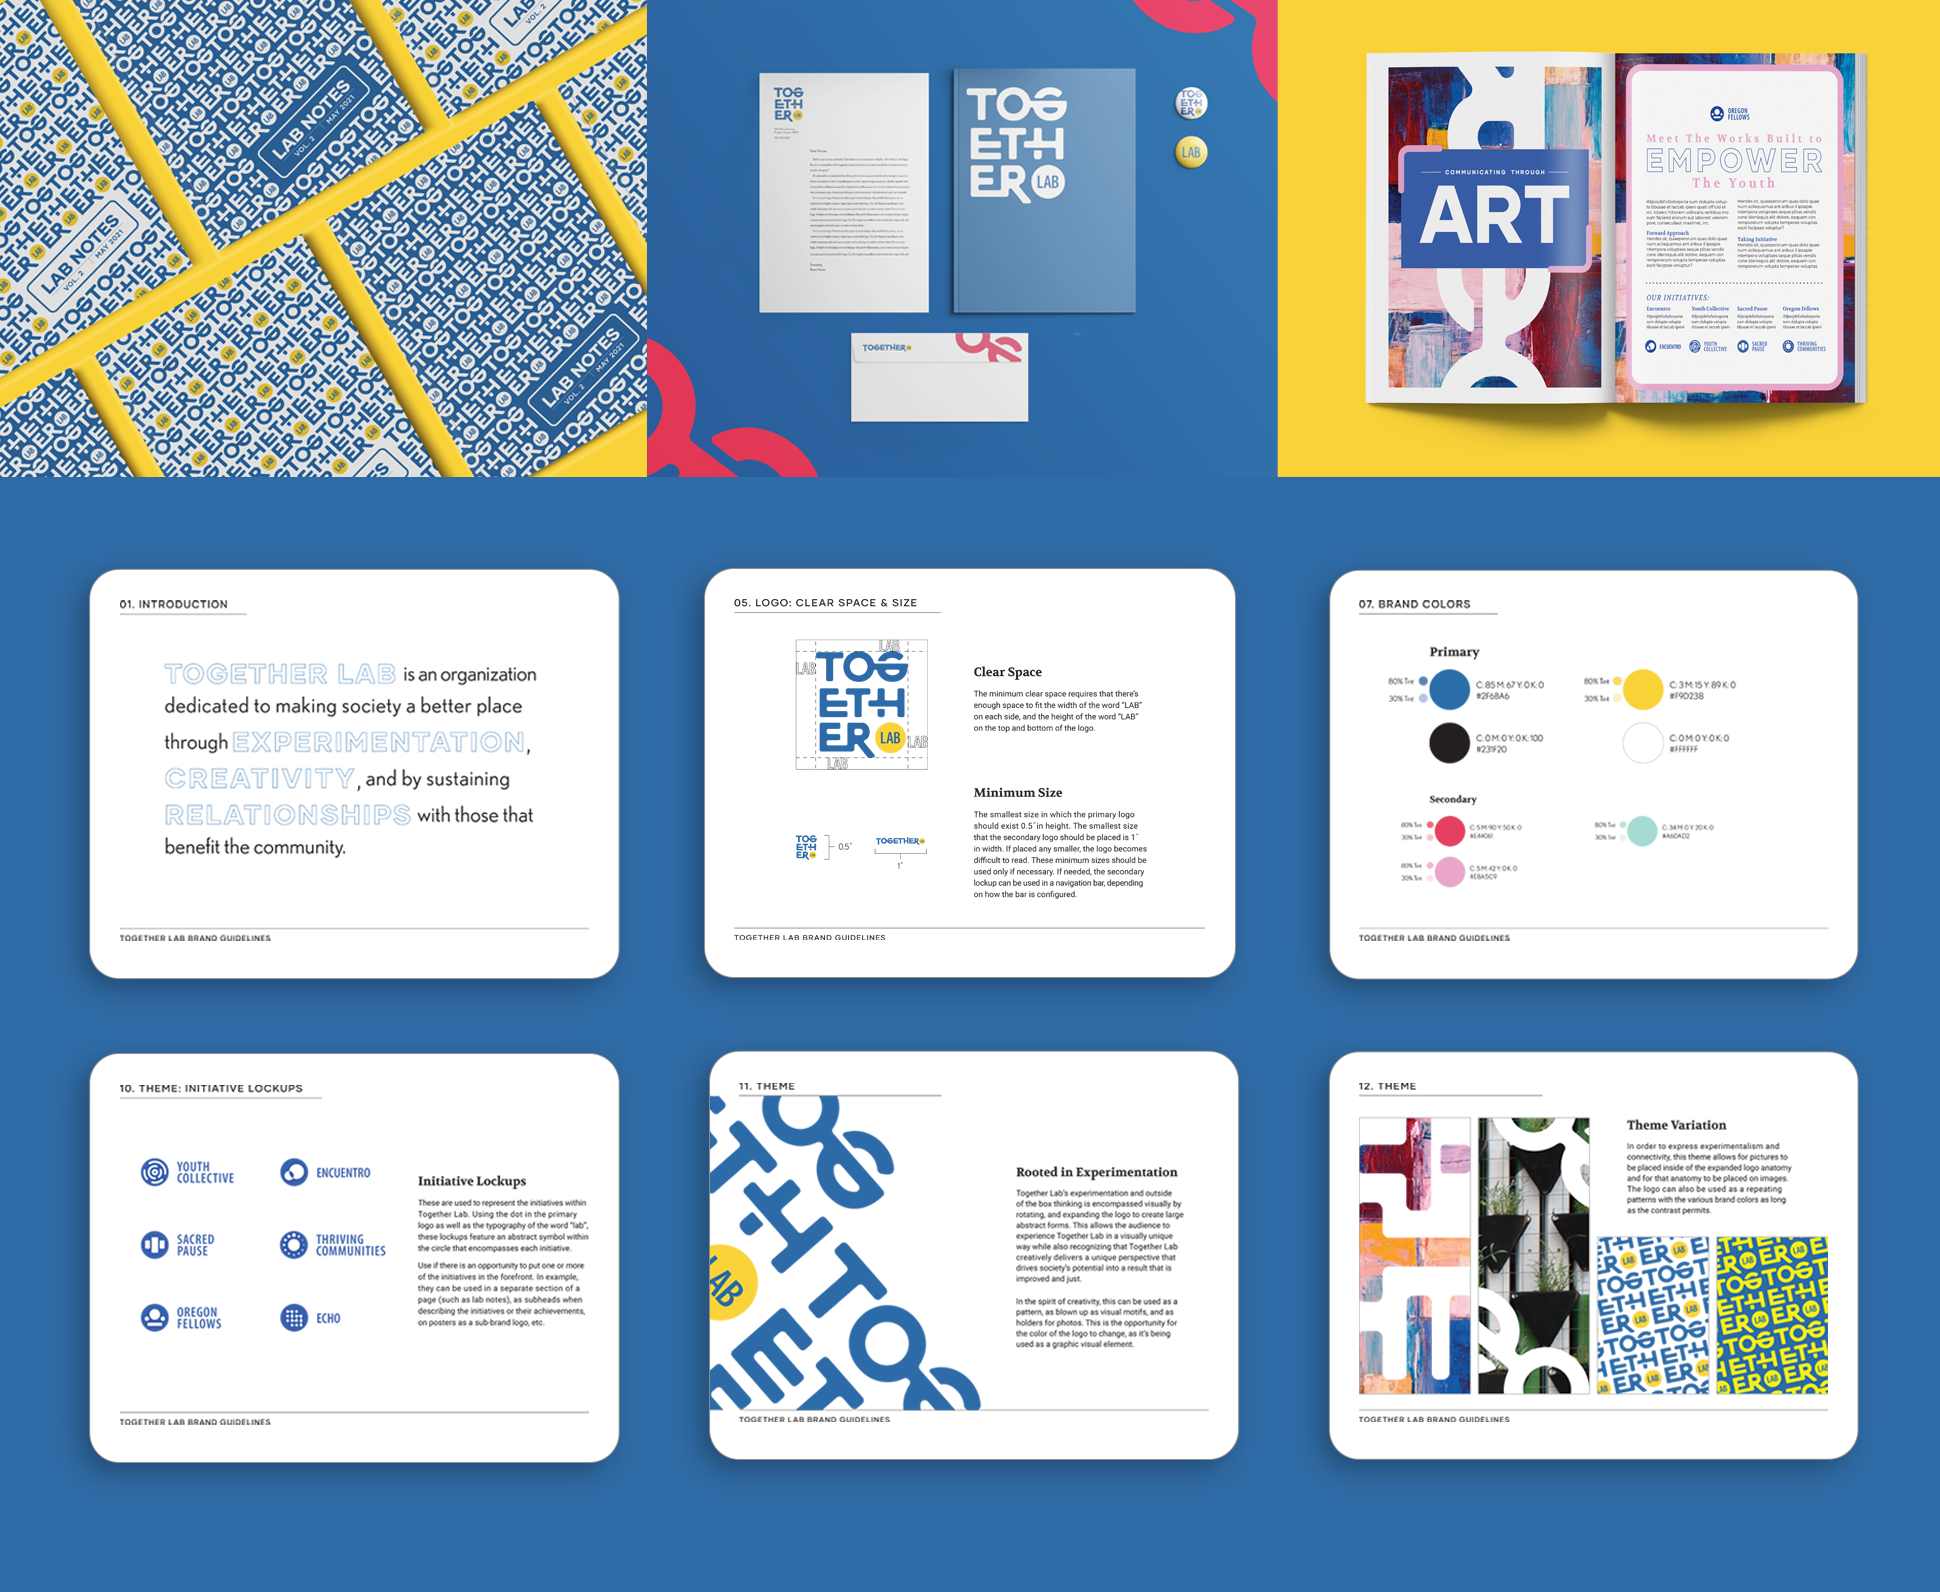 Newsletter, stationary, magazine mockup, and brand guidelines